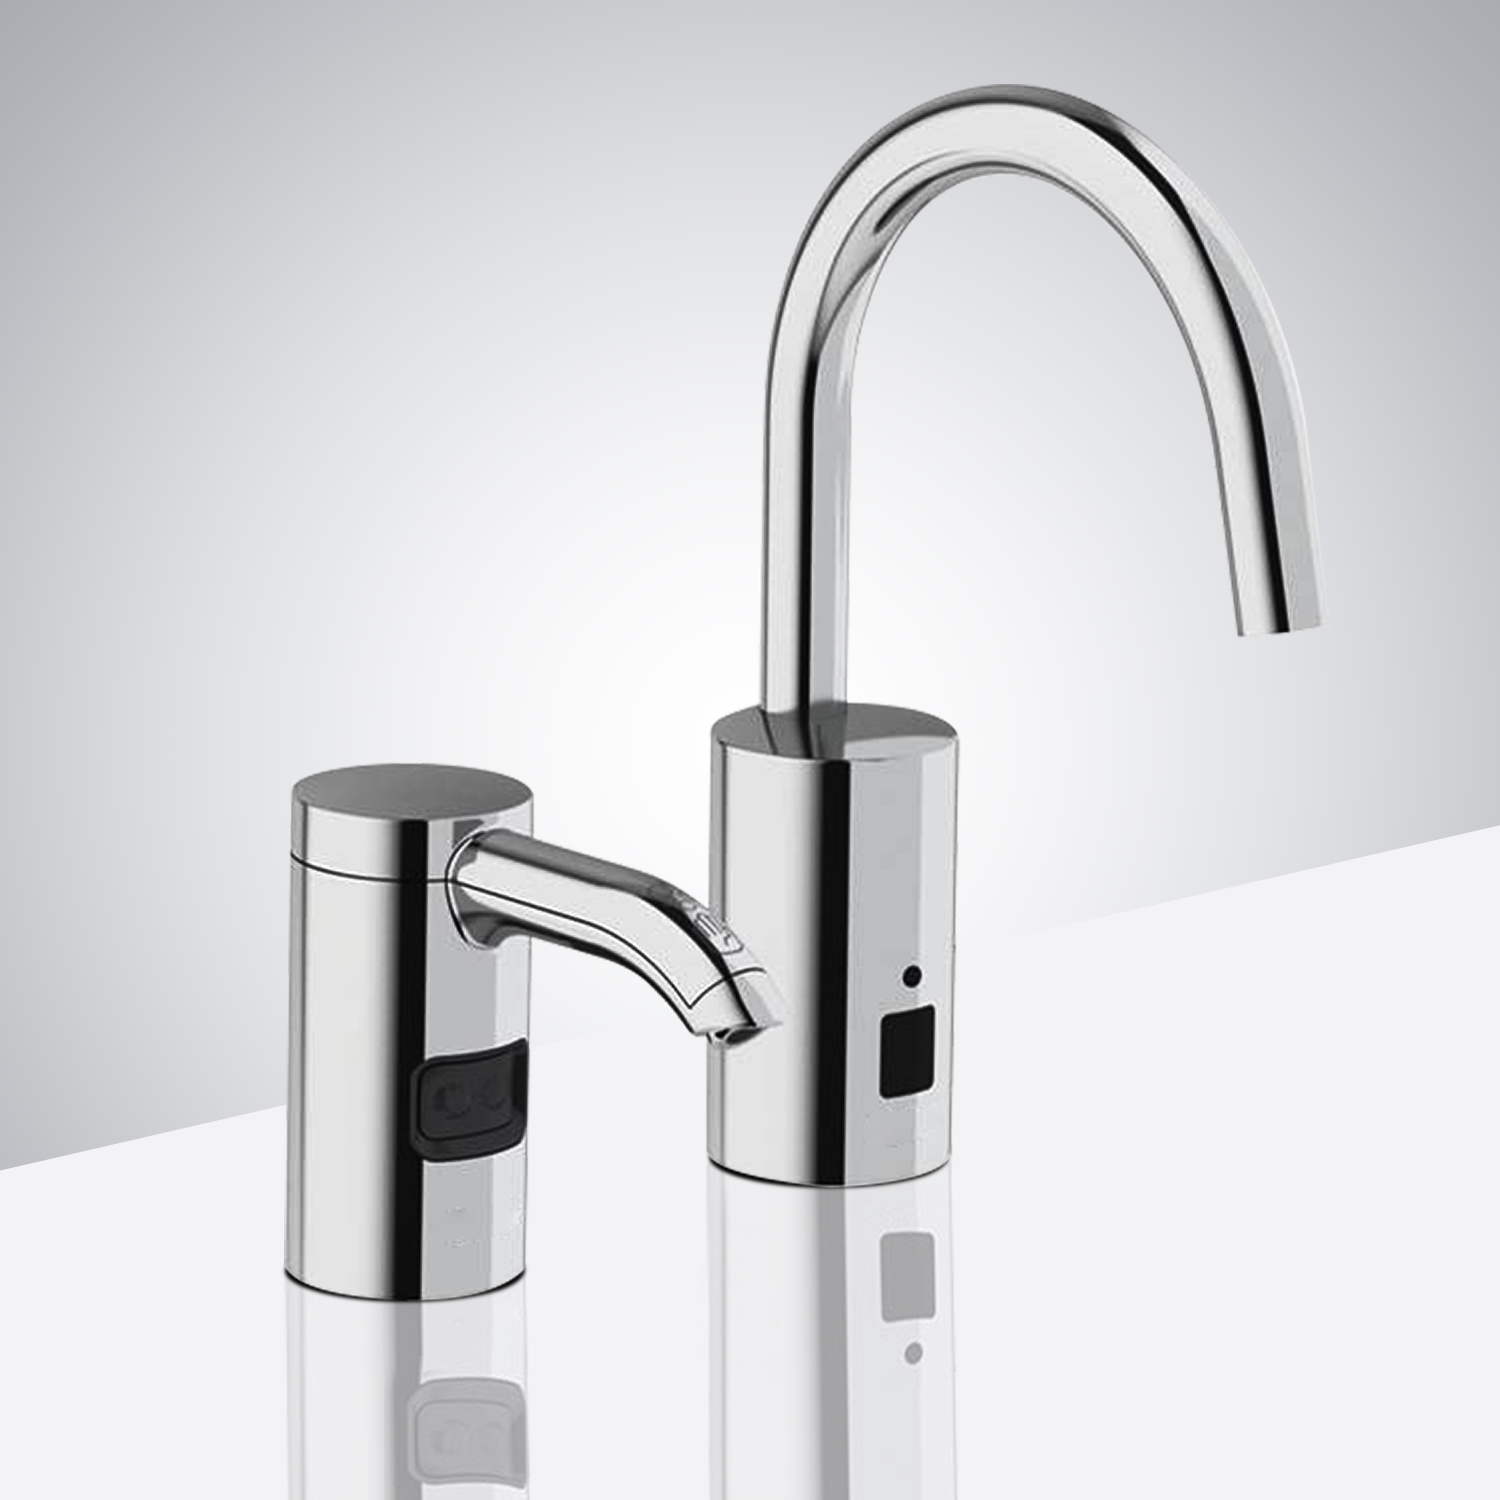 Fontana Commercial Automatic Touchless Sensor Faucet and Matching Soap Dispenser